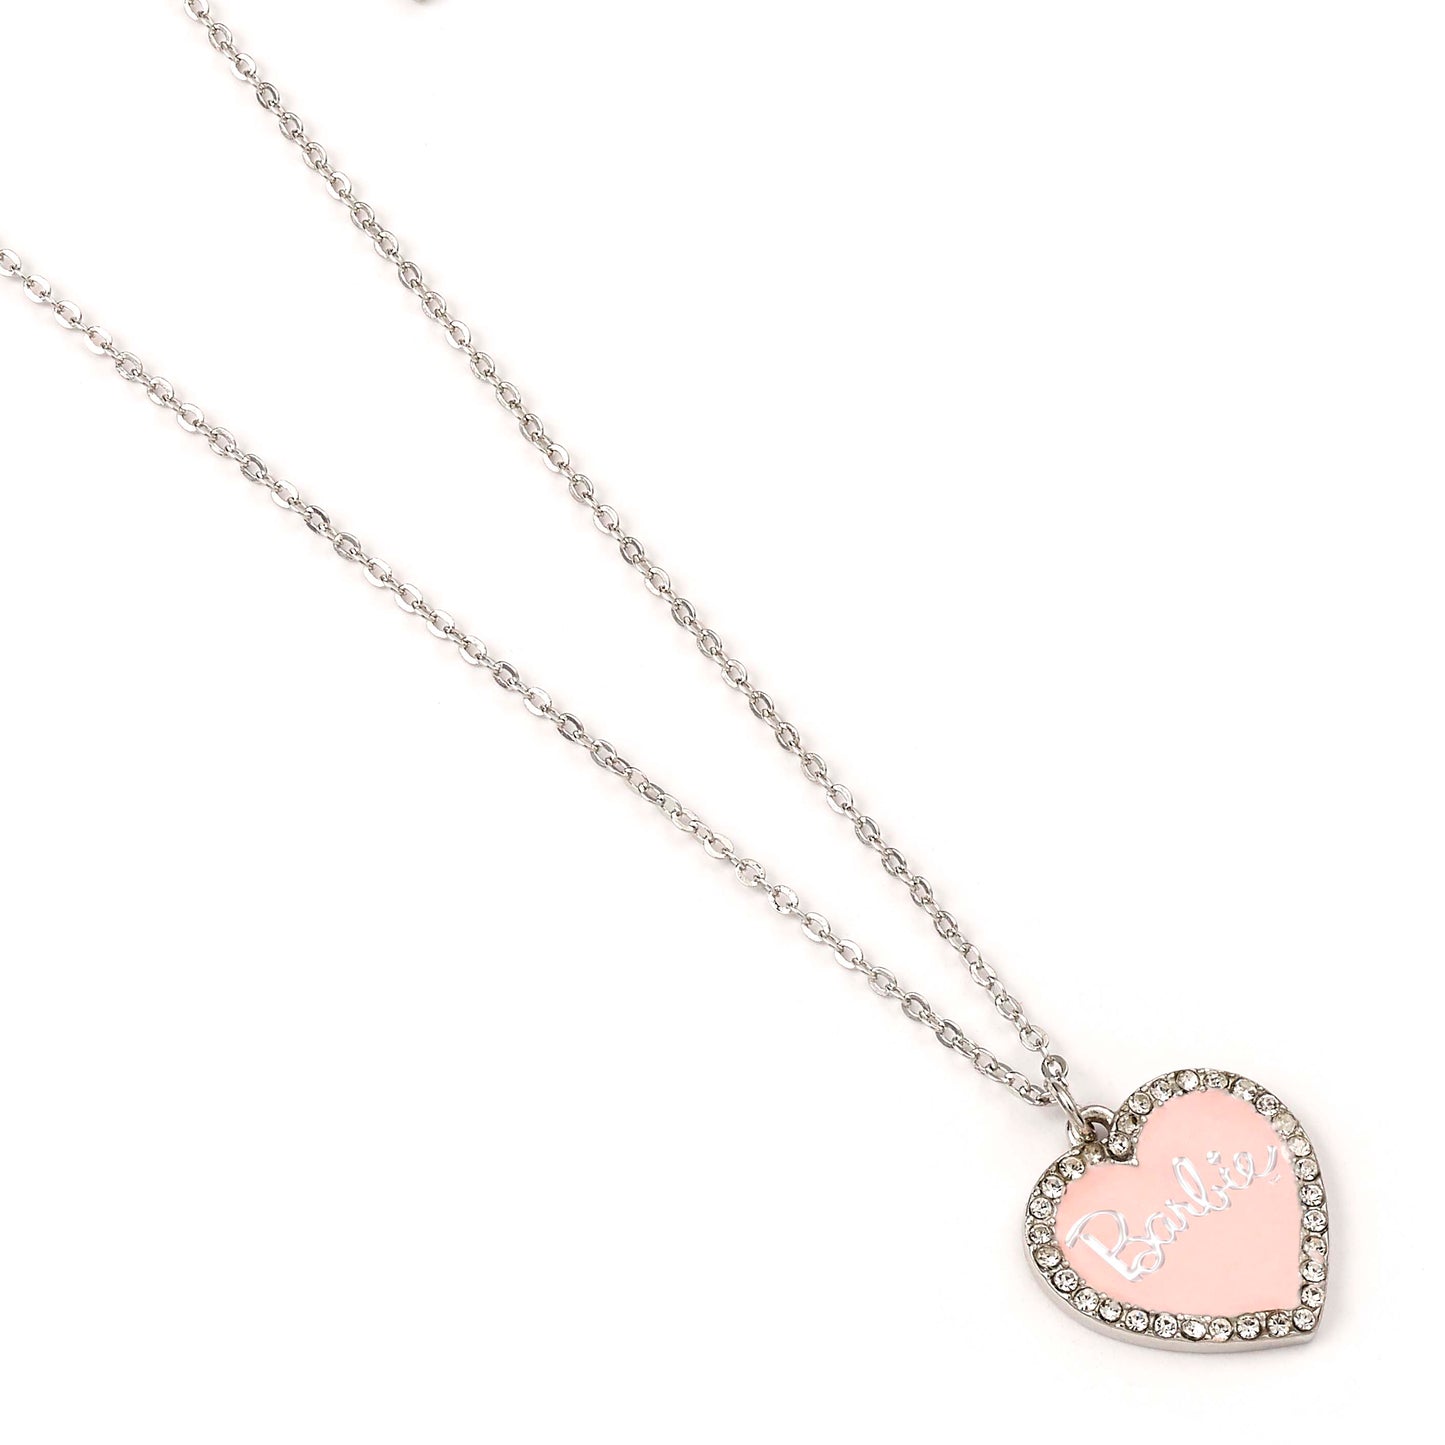 The Barbie Pink Sparkly Open Heart Pendant Necklace - The Jewelry Vine